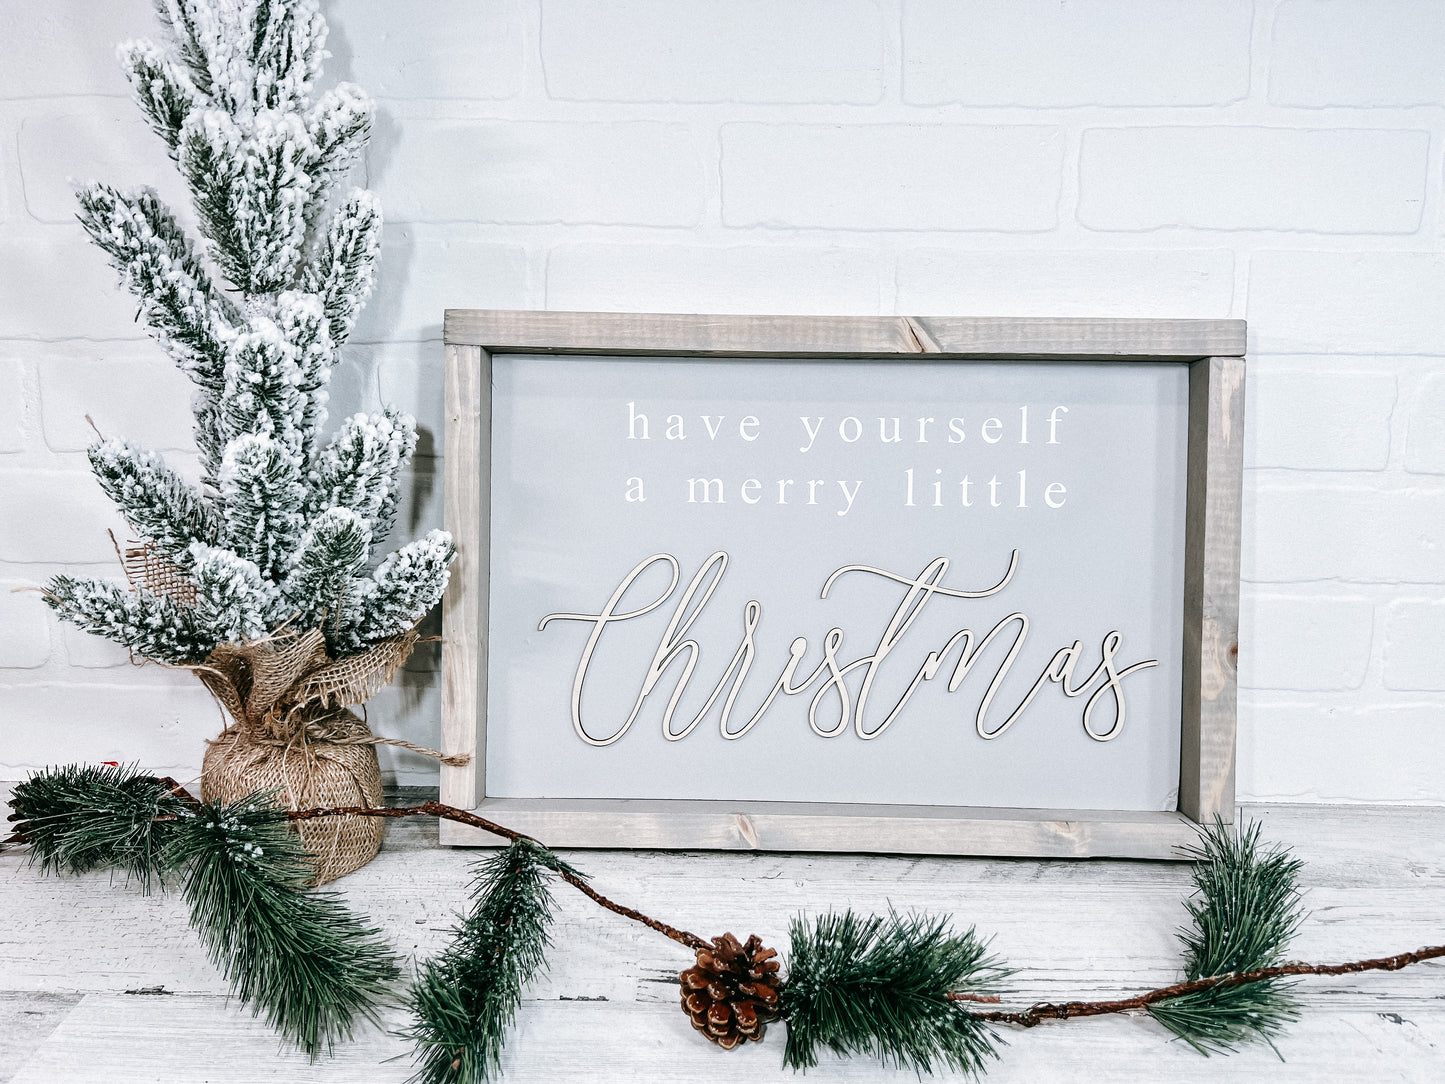 Have Yourself A Merry Little Christmas Small - B-Cozy Home Decor